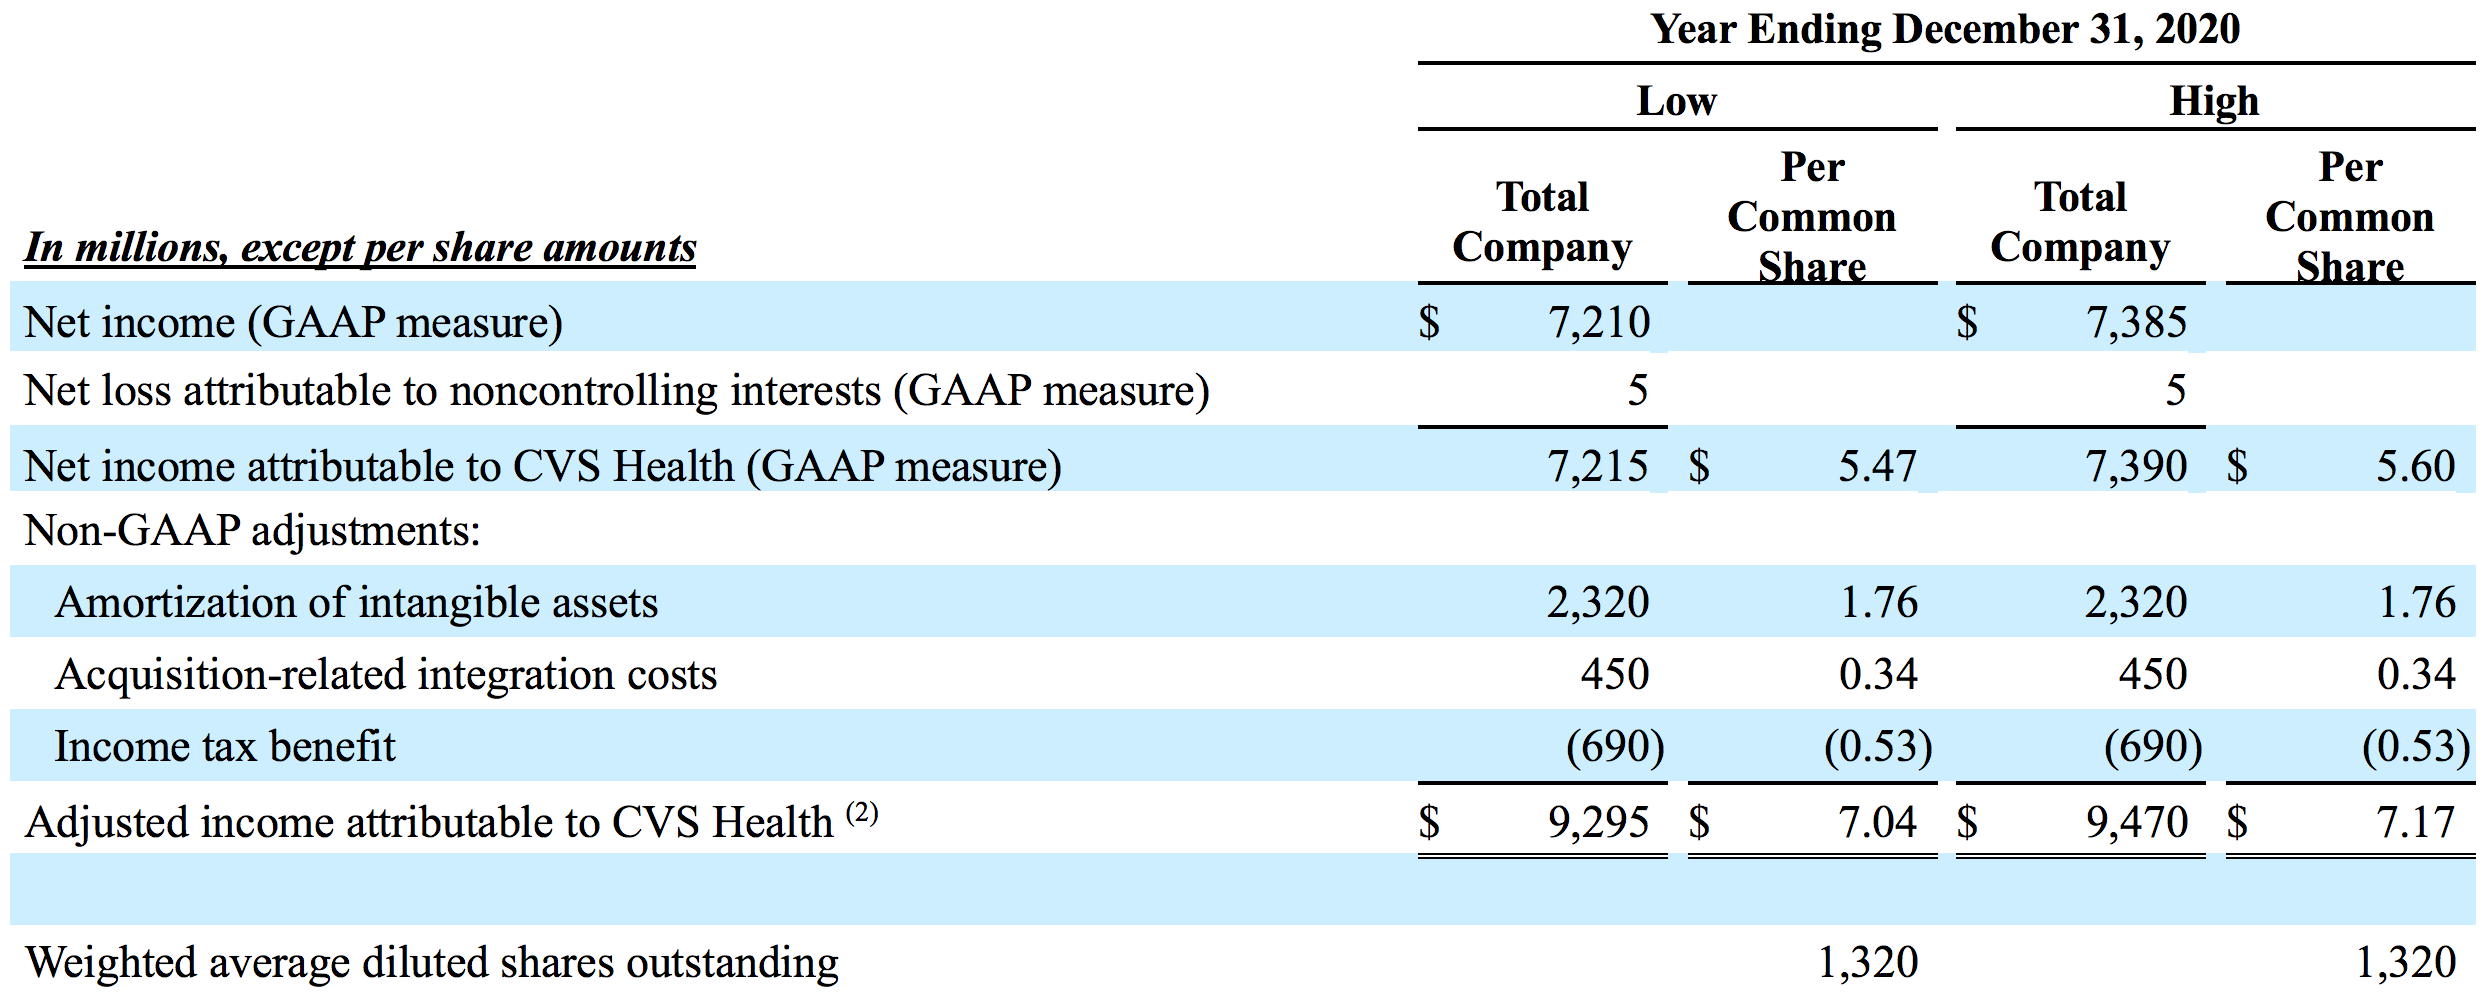 Adjusted Earnings Per Share Guidance (Unaudited)